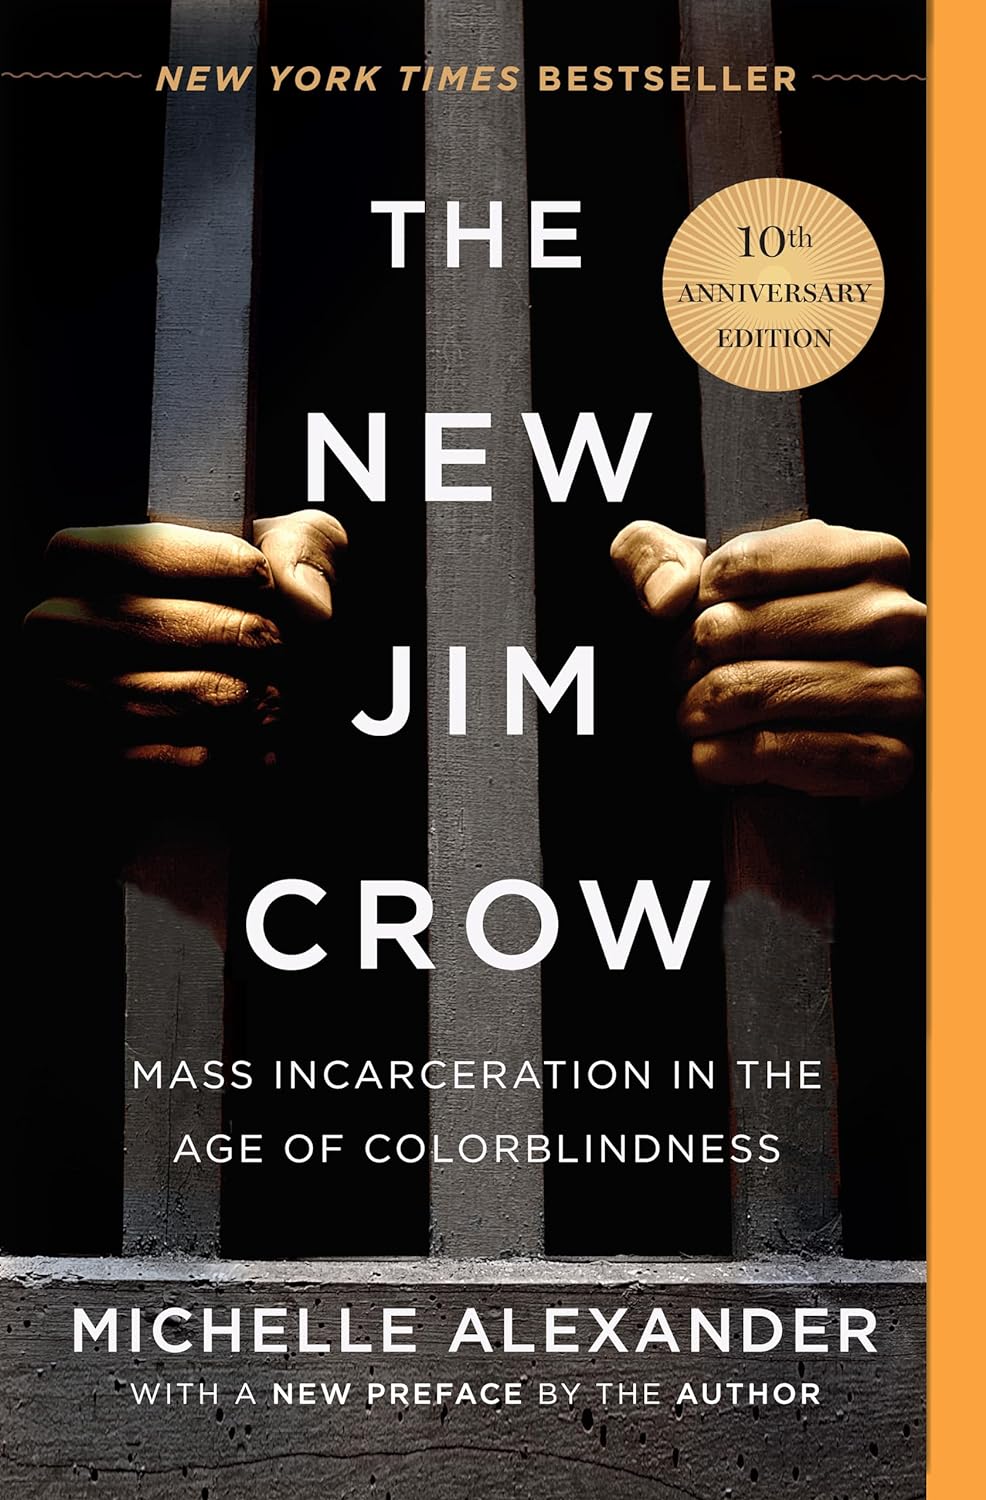 The New Jim Crow Mass Incarceration in the Age of Colorblindness by Michelle Alexander (2010)